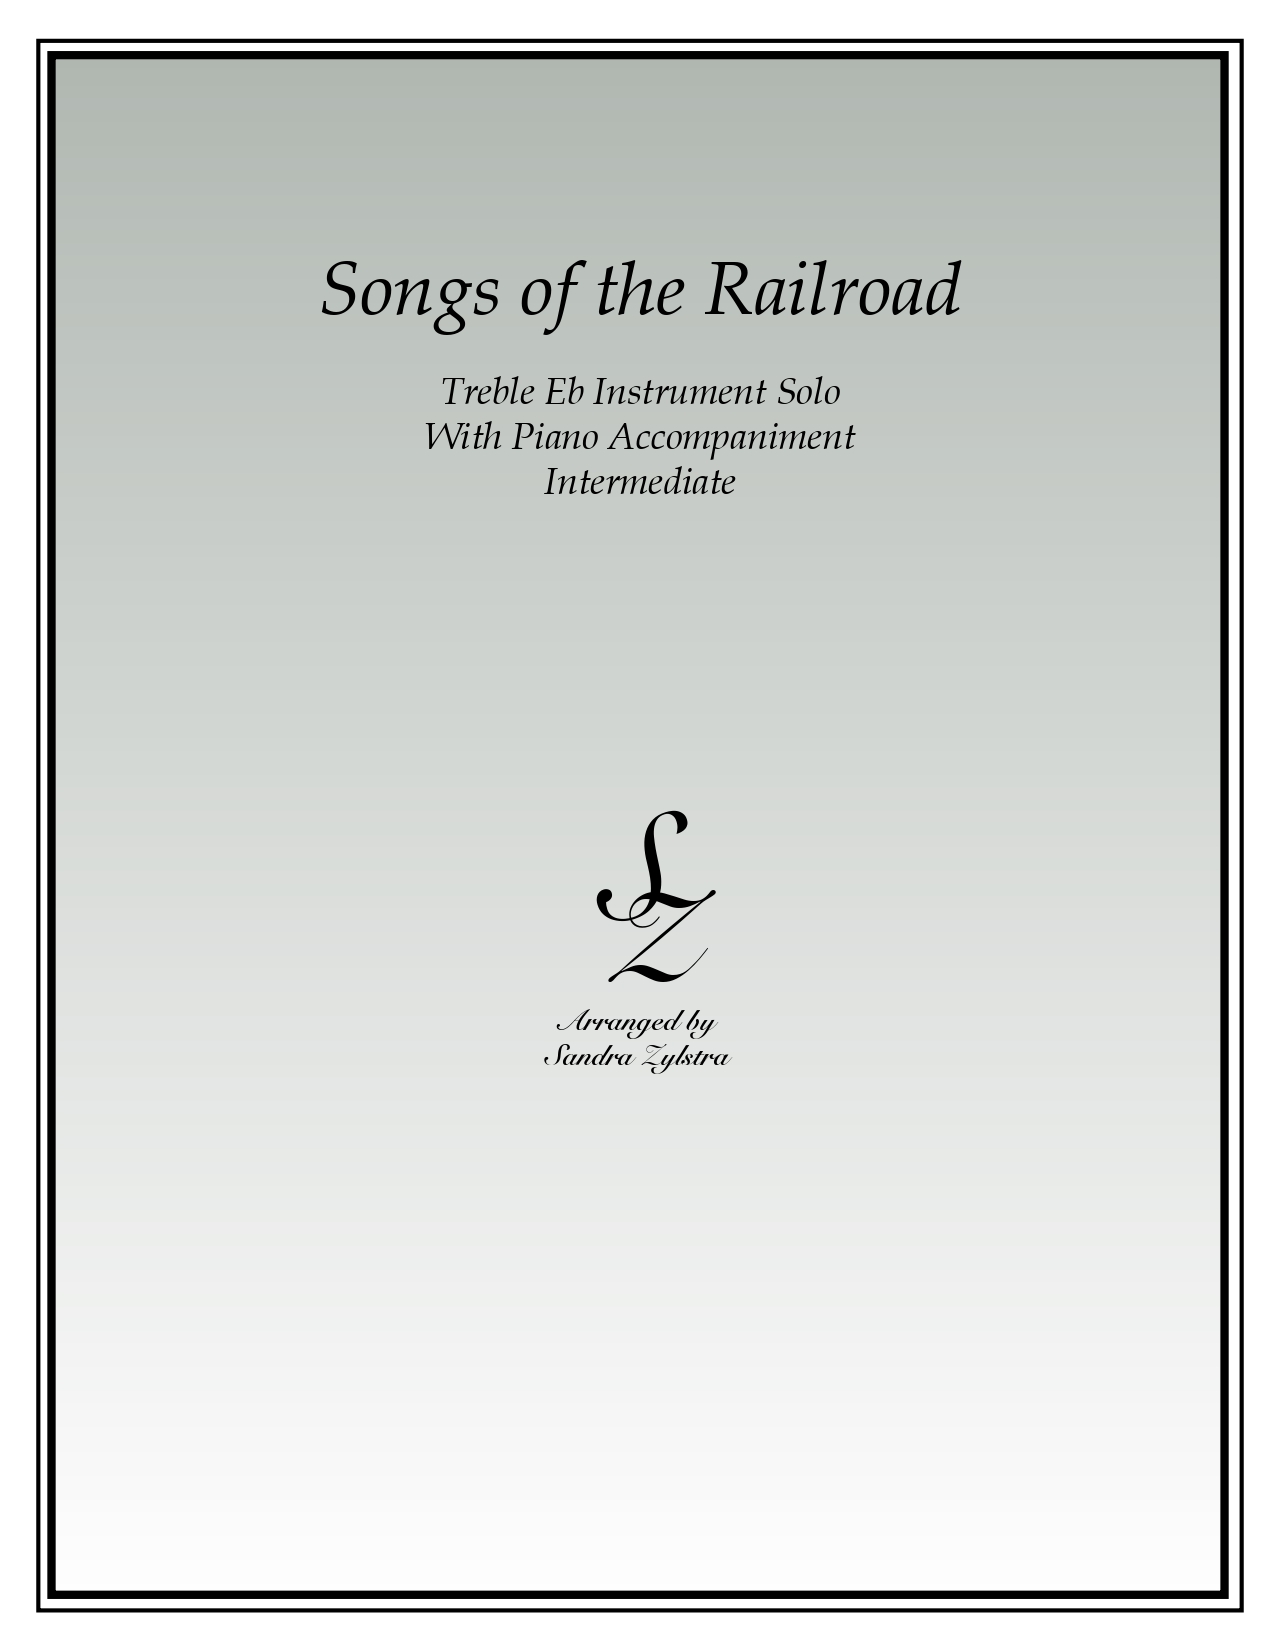 Songs Of The Railroad Eb instrument solo part cover page 00011